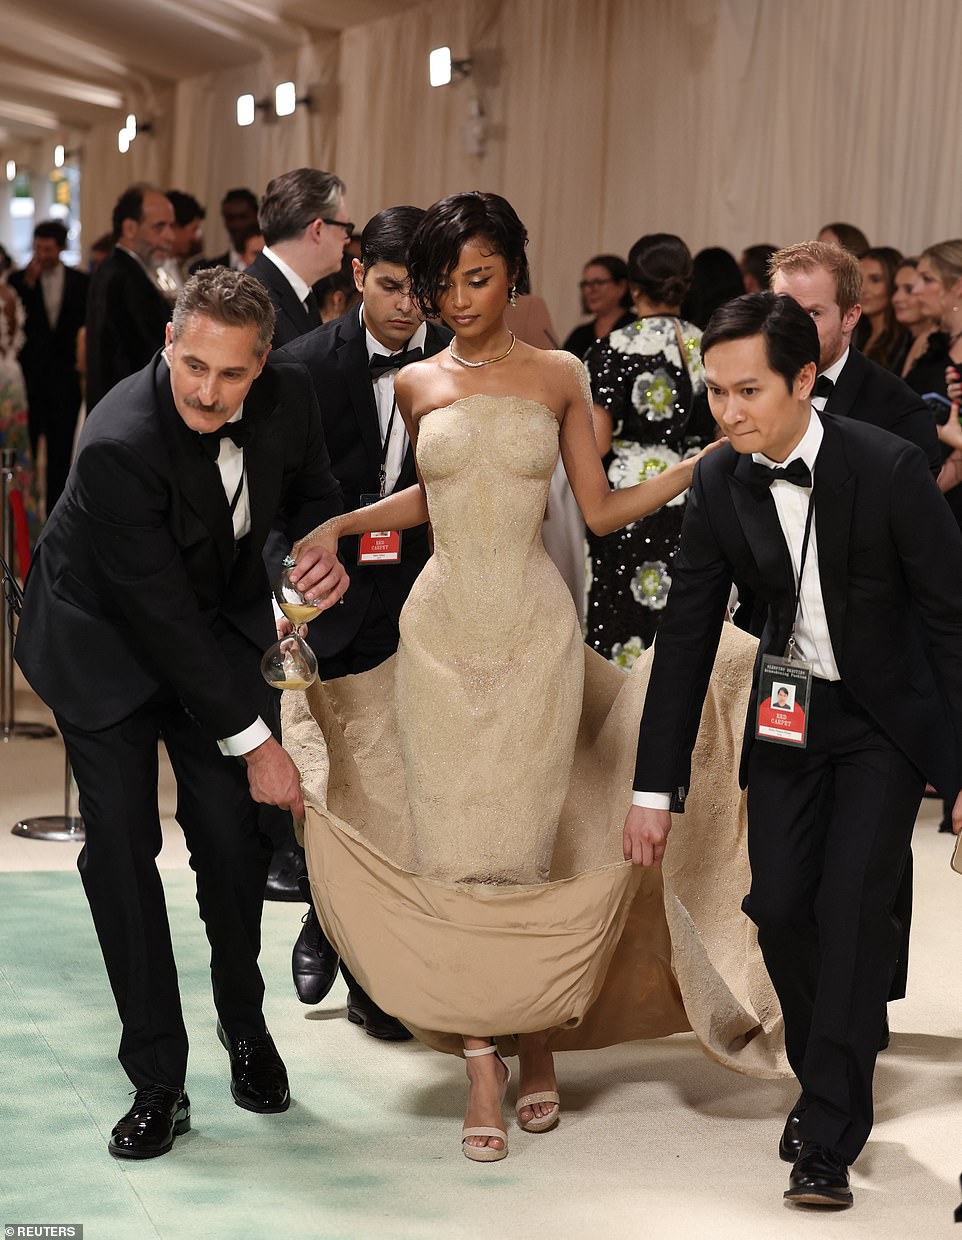 She had assistance walking on the red carpet - due to the delicate nature of her gown